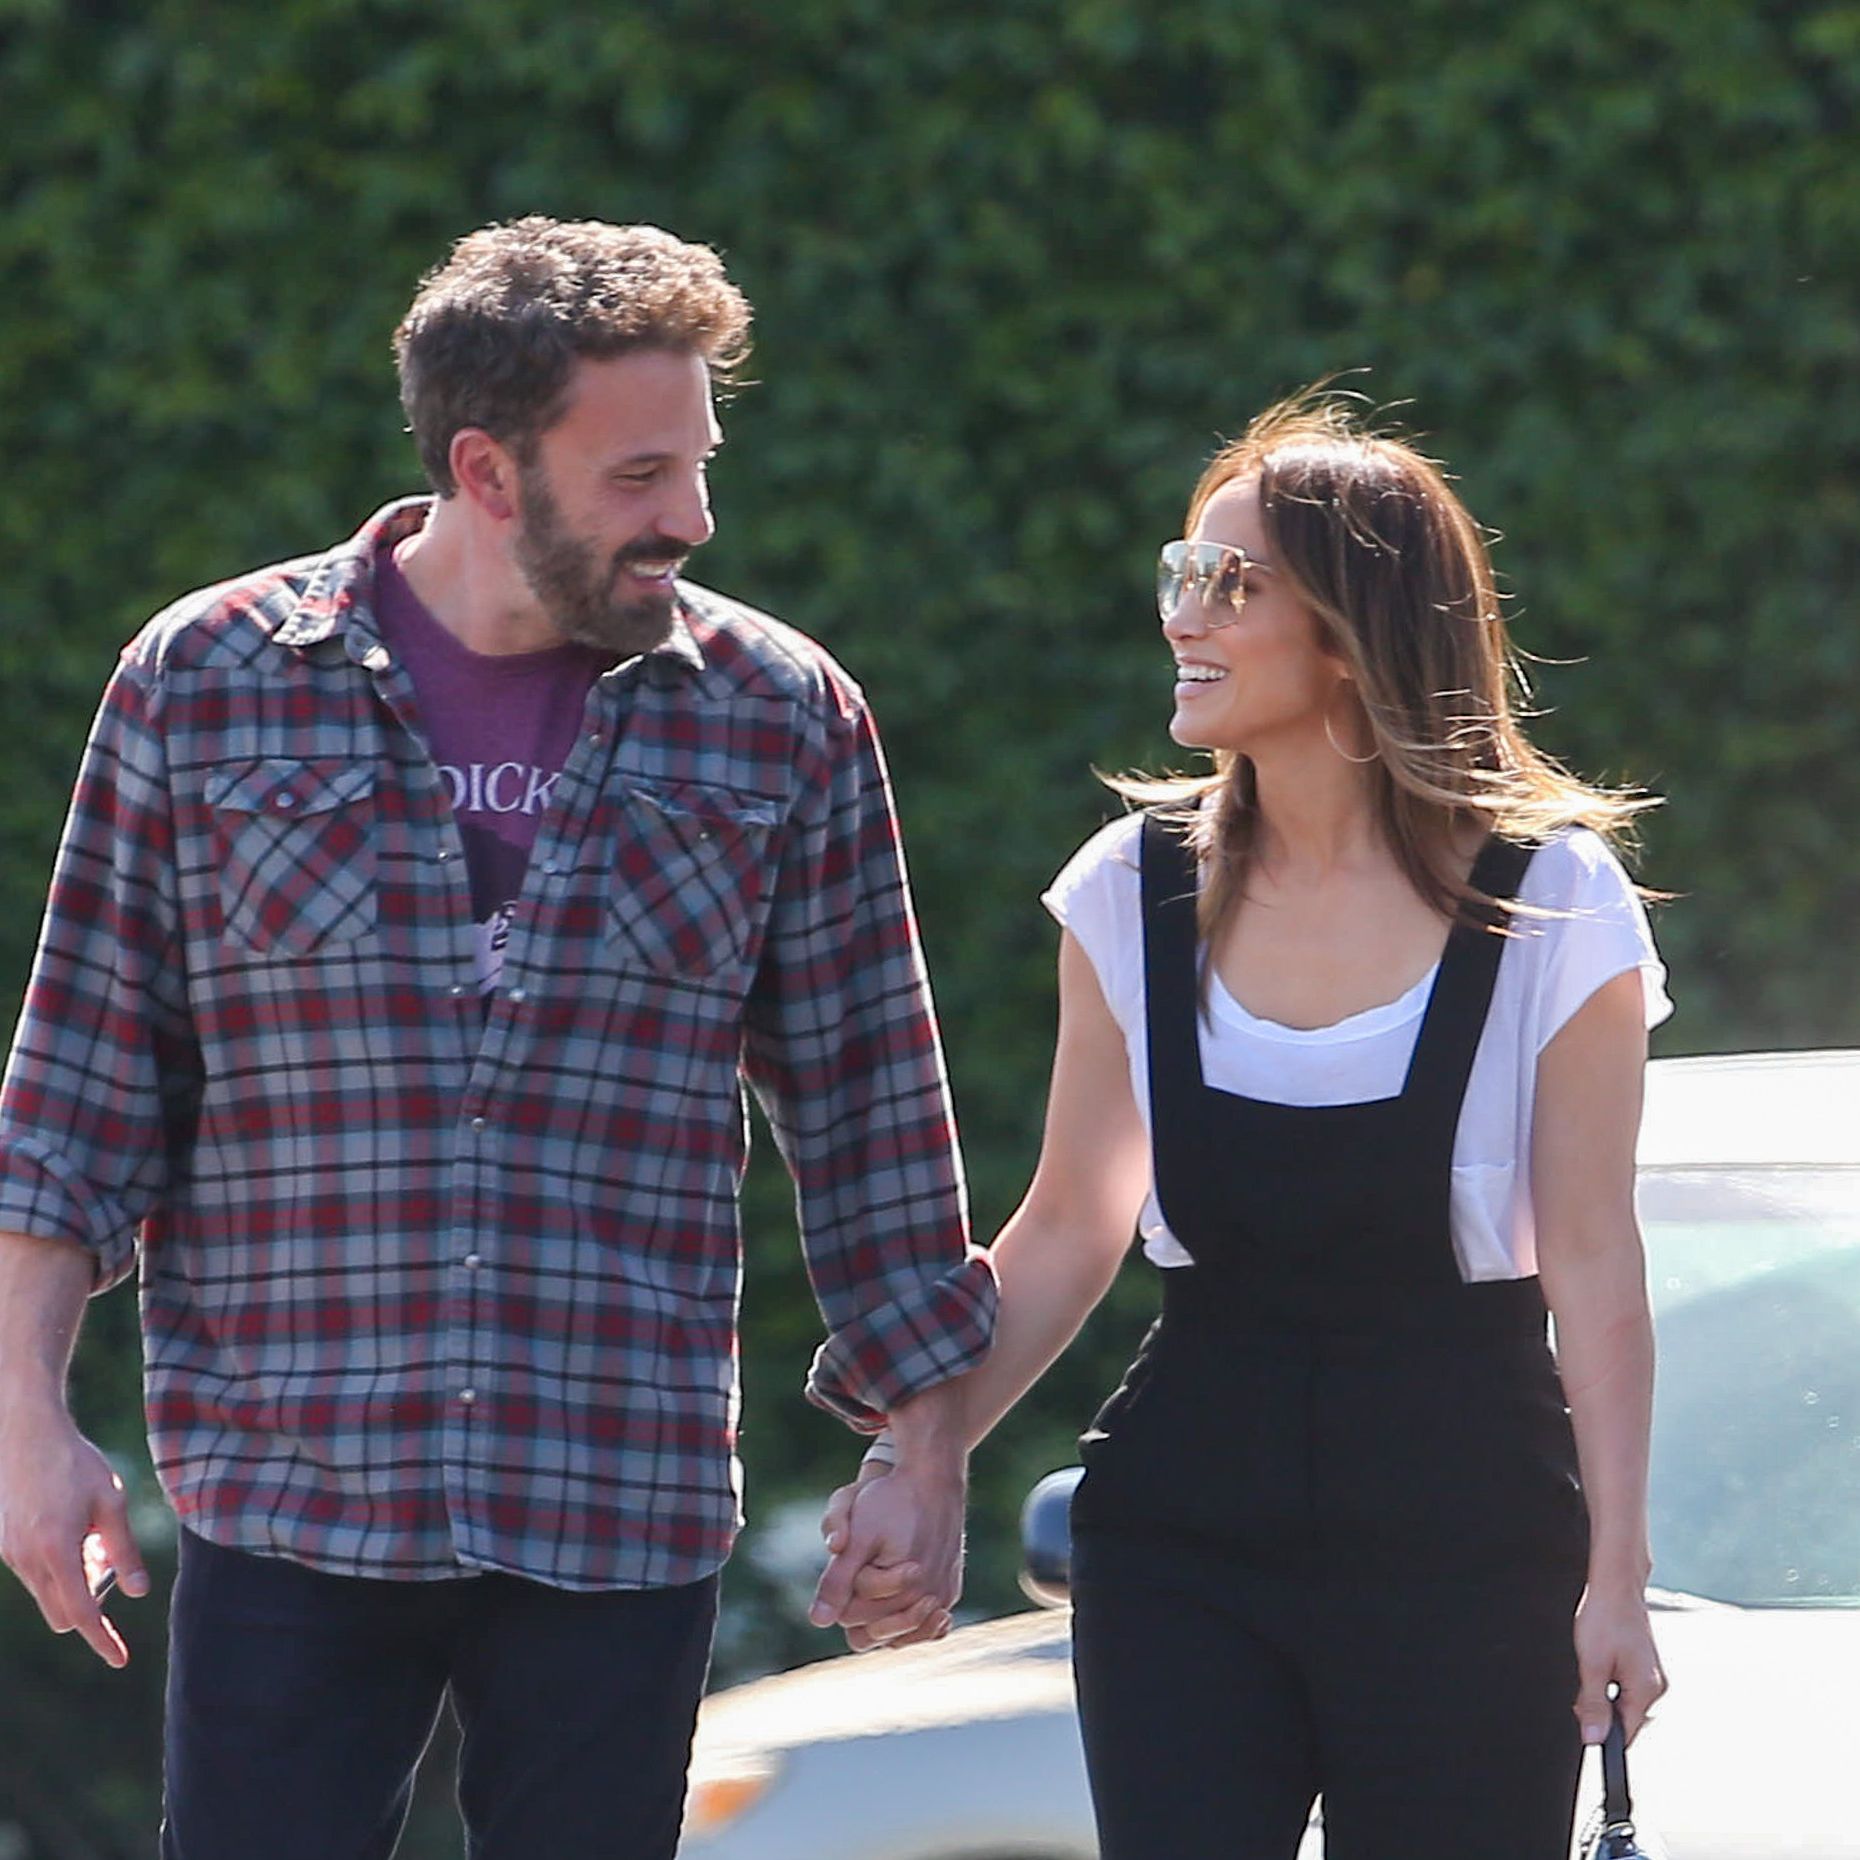 The way Affleck looks at Lopez is so cute.